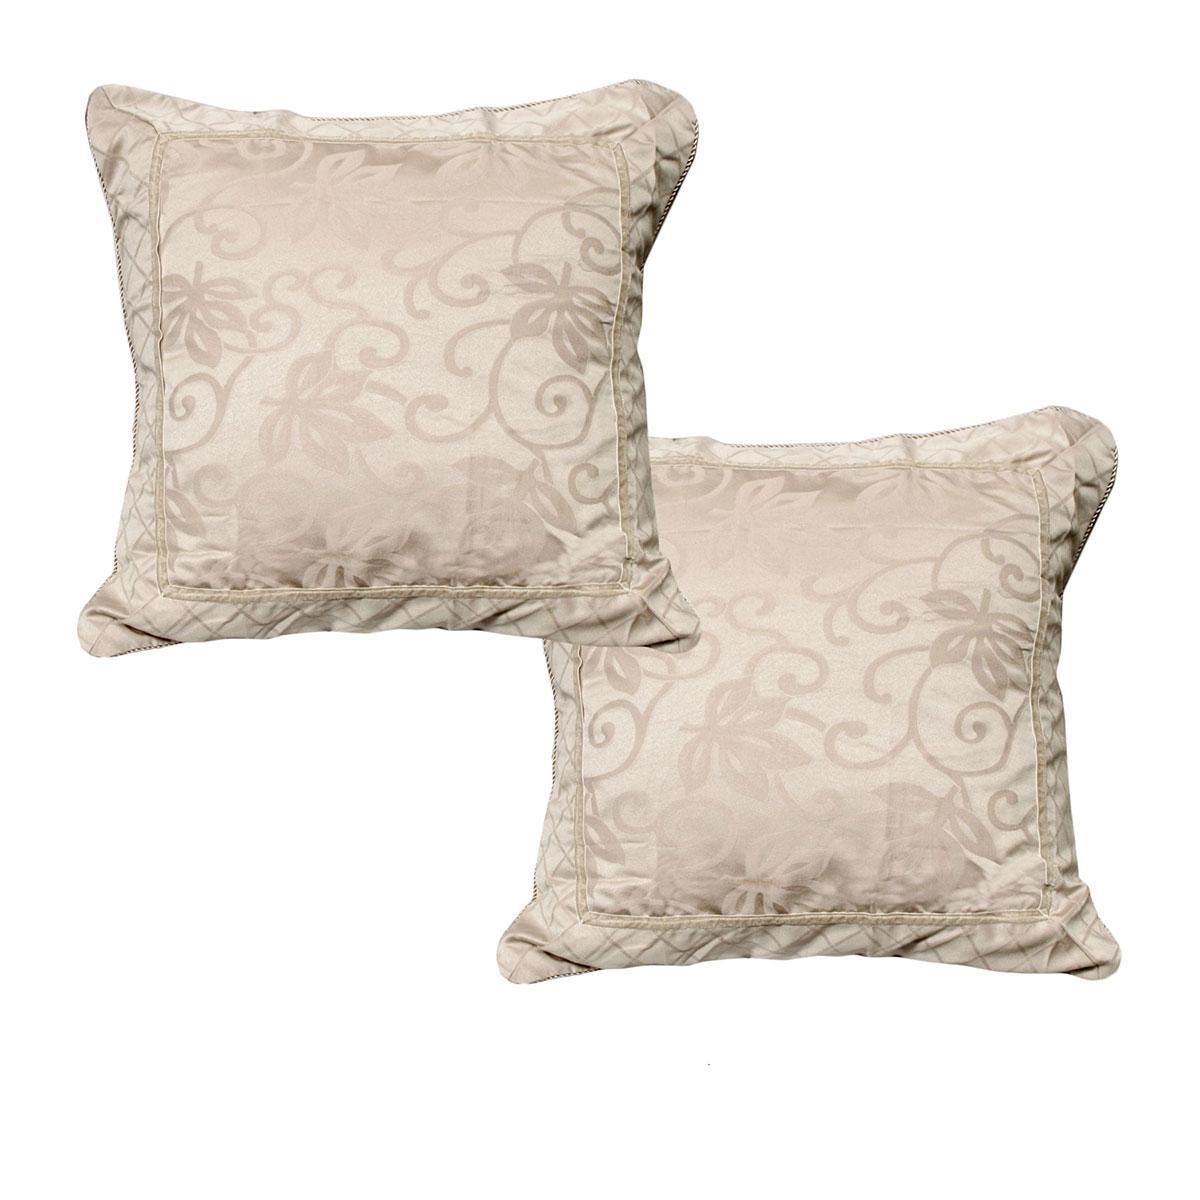 Phase 2 Magnifico Oyster Pair of European Pillowcases 65 x 65 cm